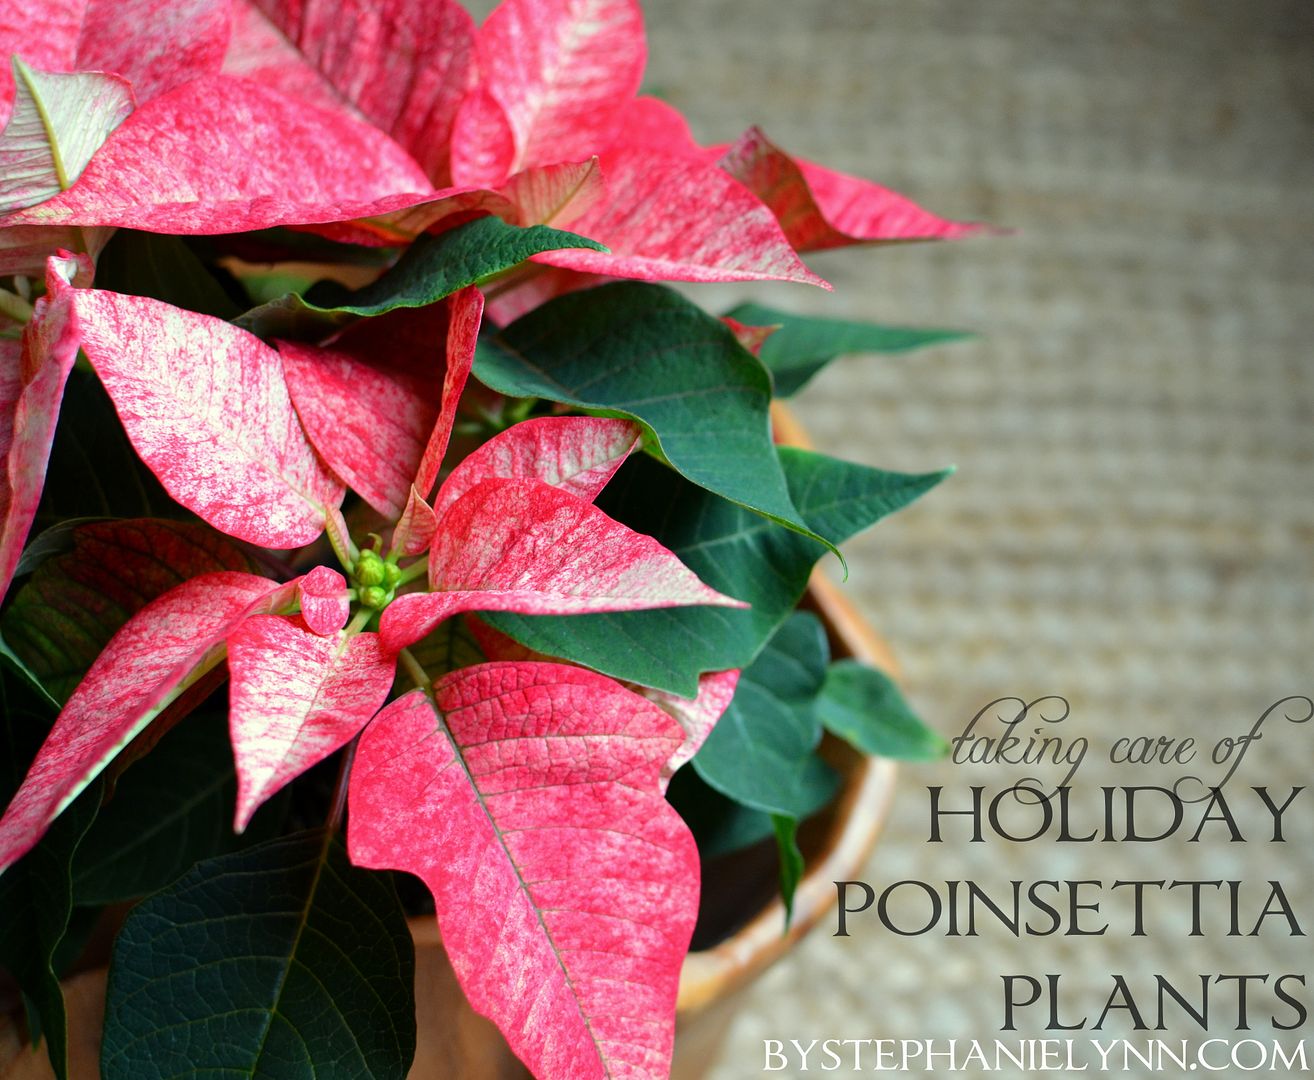 Tips for Taking Care of Holiday Poinsettia Plants: Tuesday Ten